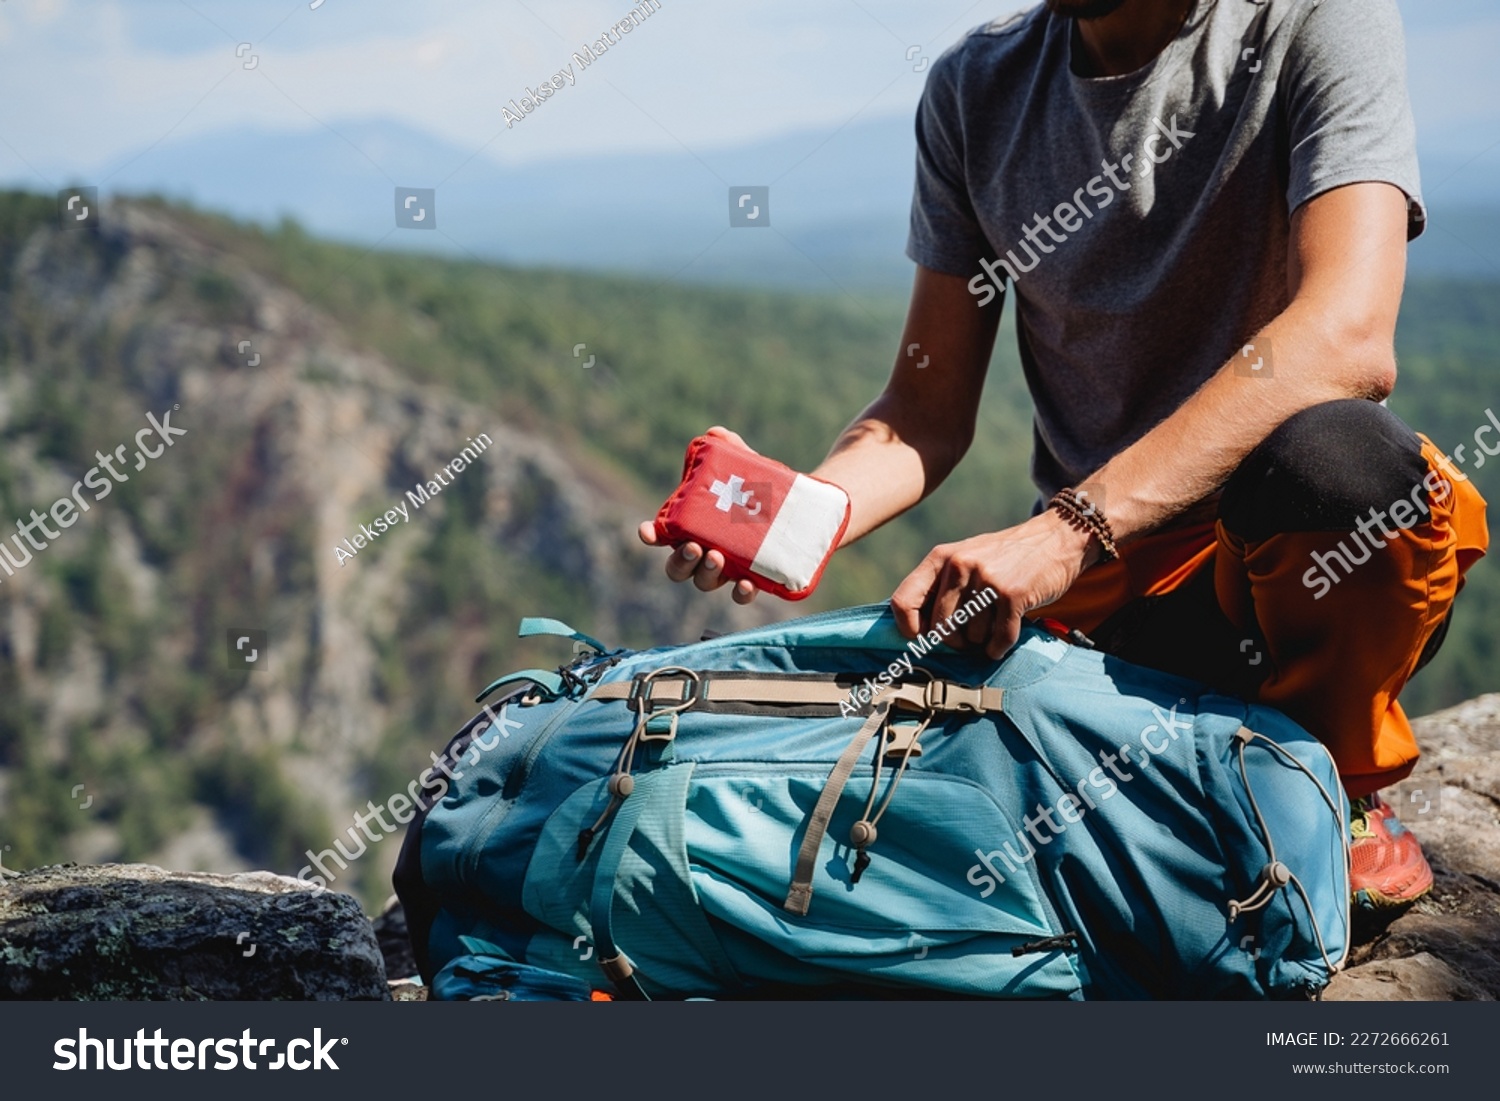 Take a first-aid kit in a backpack on a trip, a hand holds a first aid kit against the background of mountains, equipment in an extreme hike, a white cross #2272666261